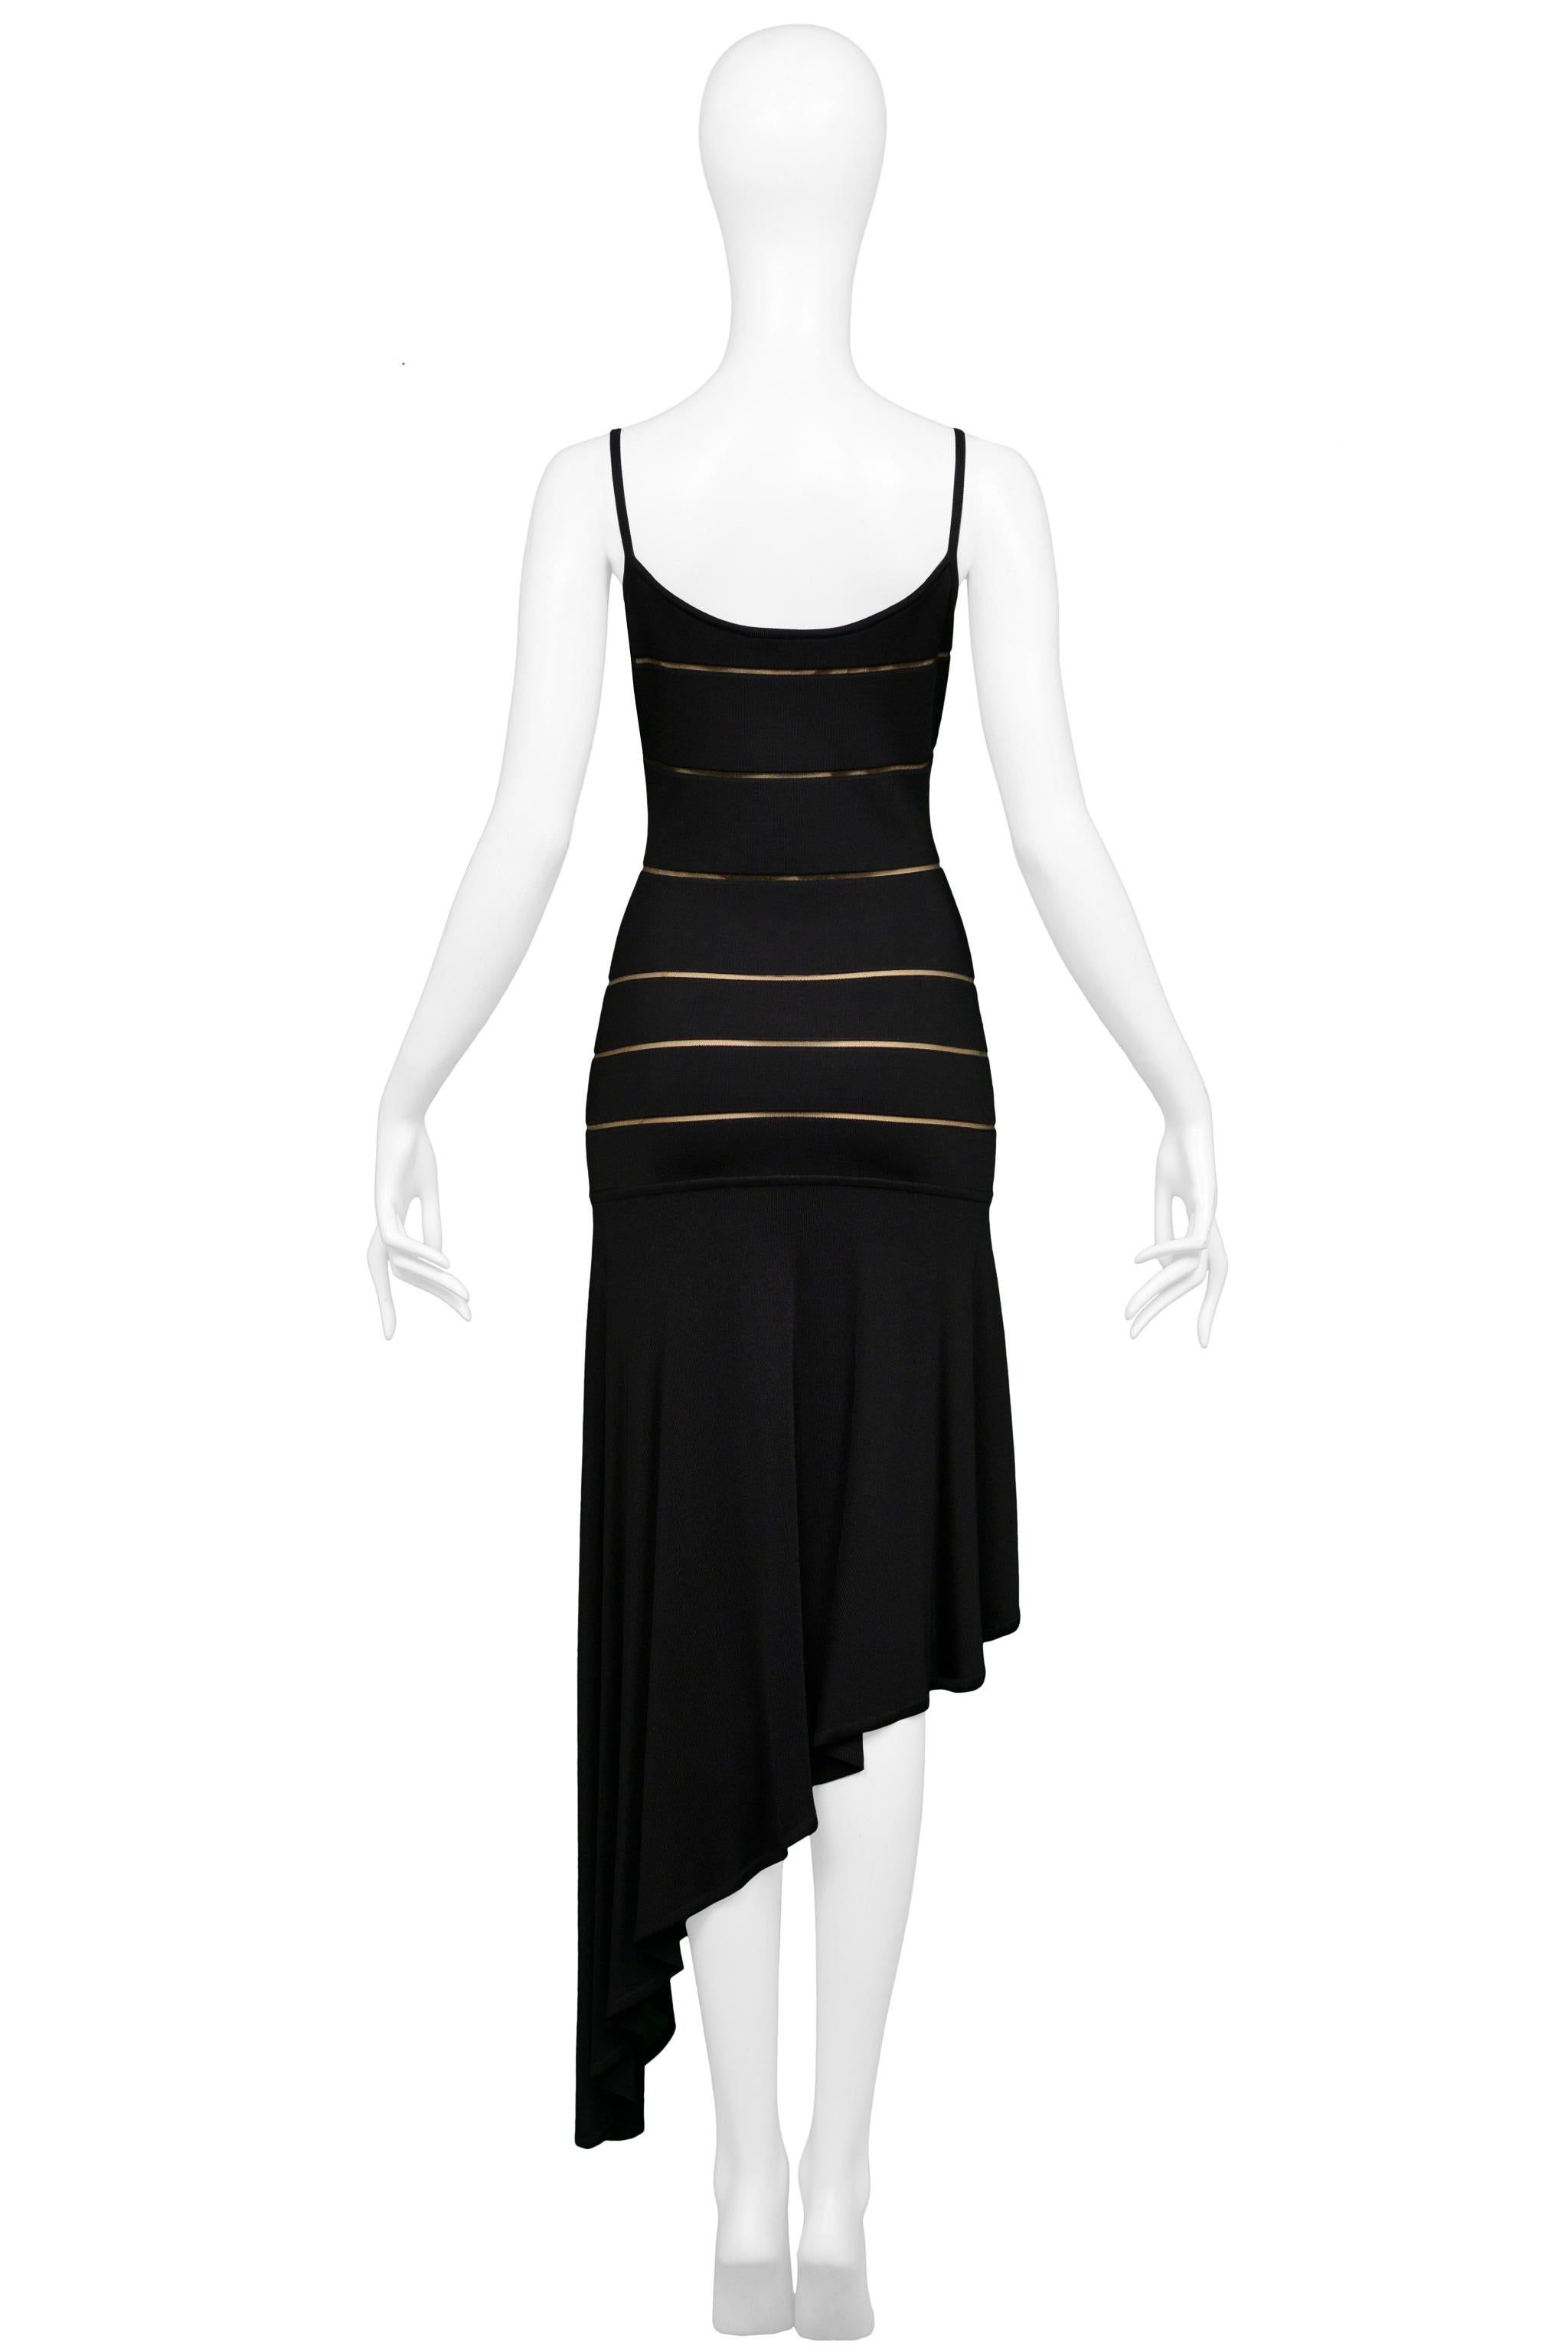 Herve Leger Striped Asymmetrical Bodycon Dress 1990's In Excellent Condition For Sale In Los Angeles, CA